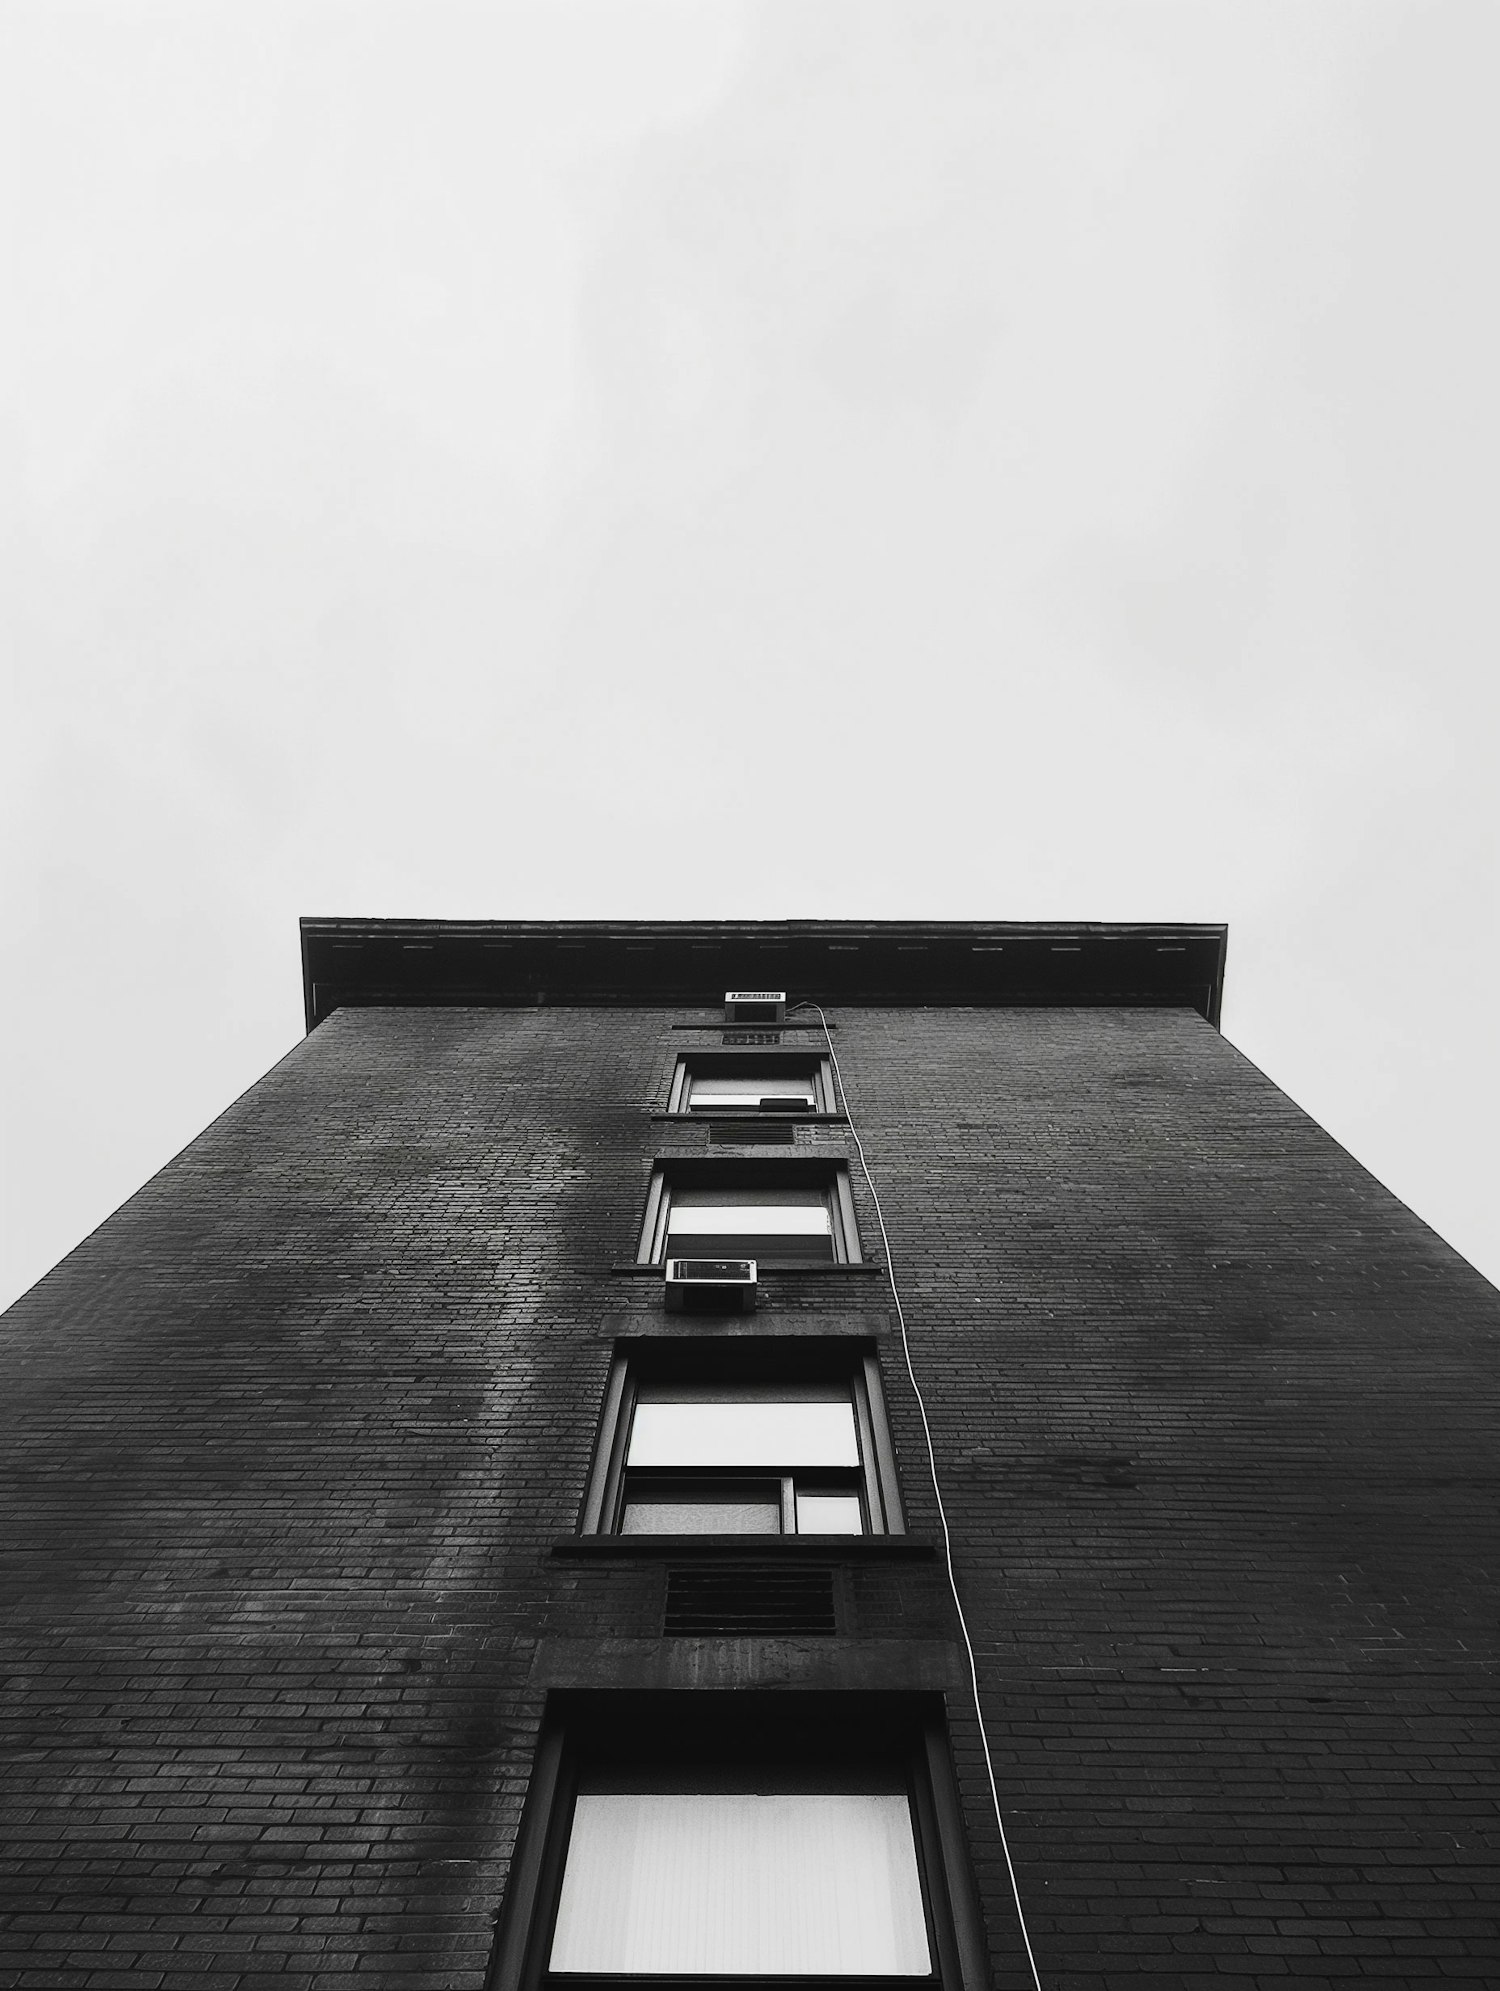 Architectural Perspective Against Overcast Sky